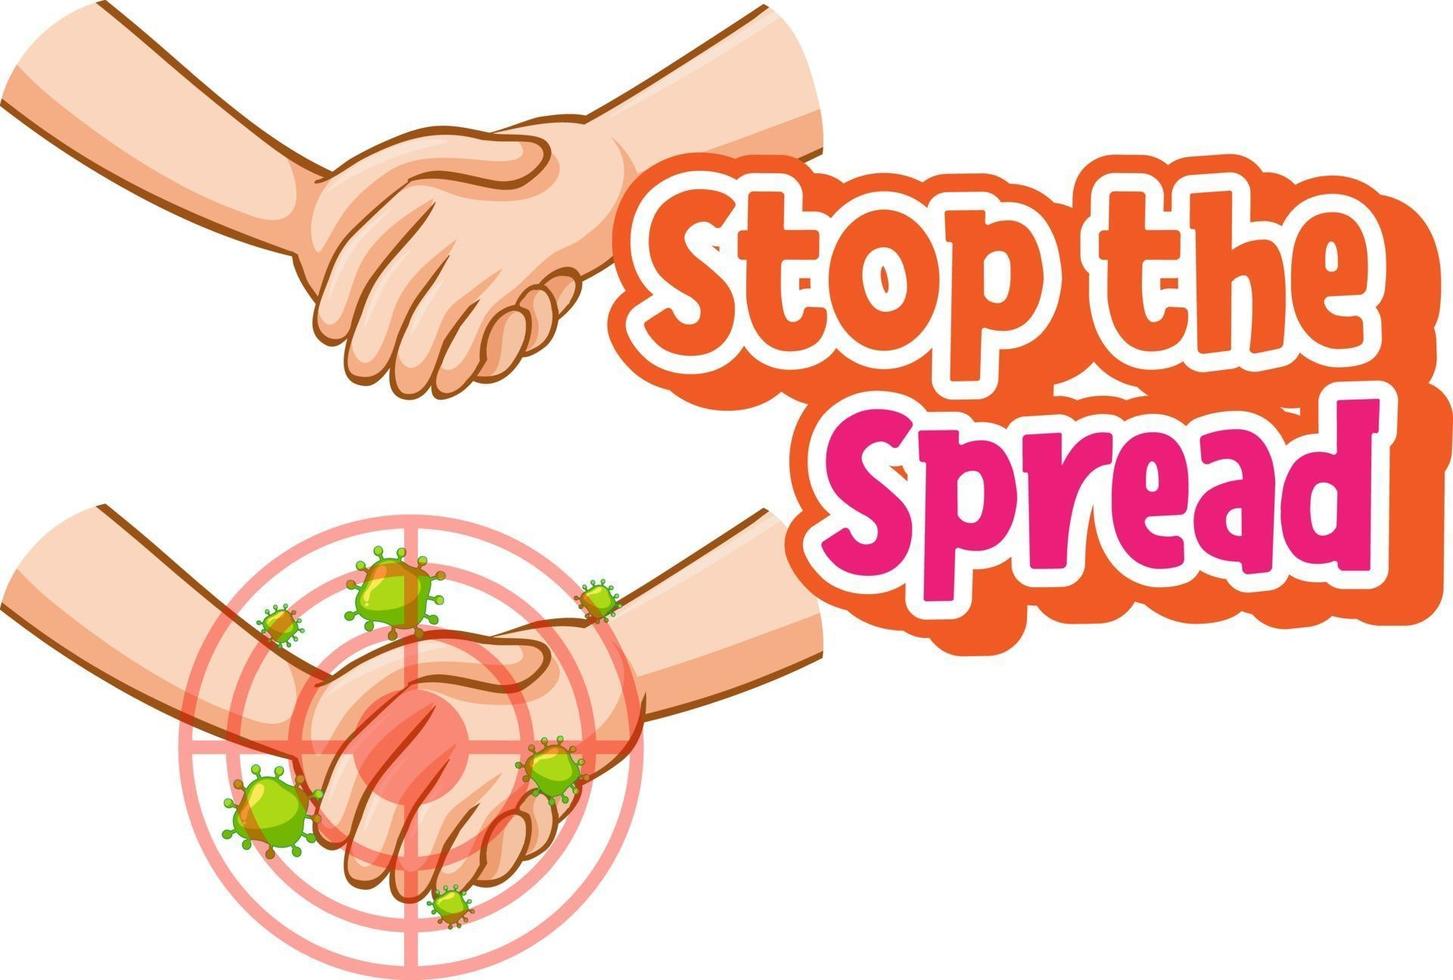 Stop the spread font design with virus spreads from shaking hands vector